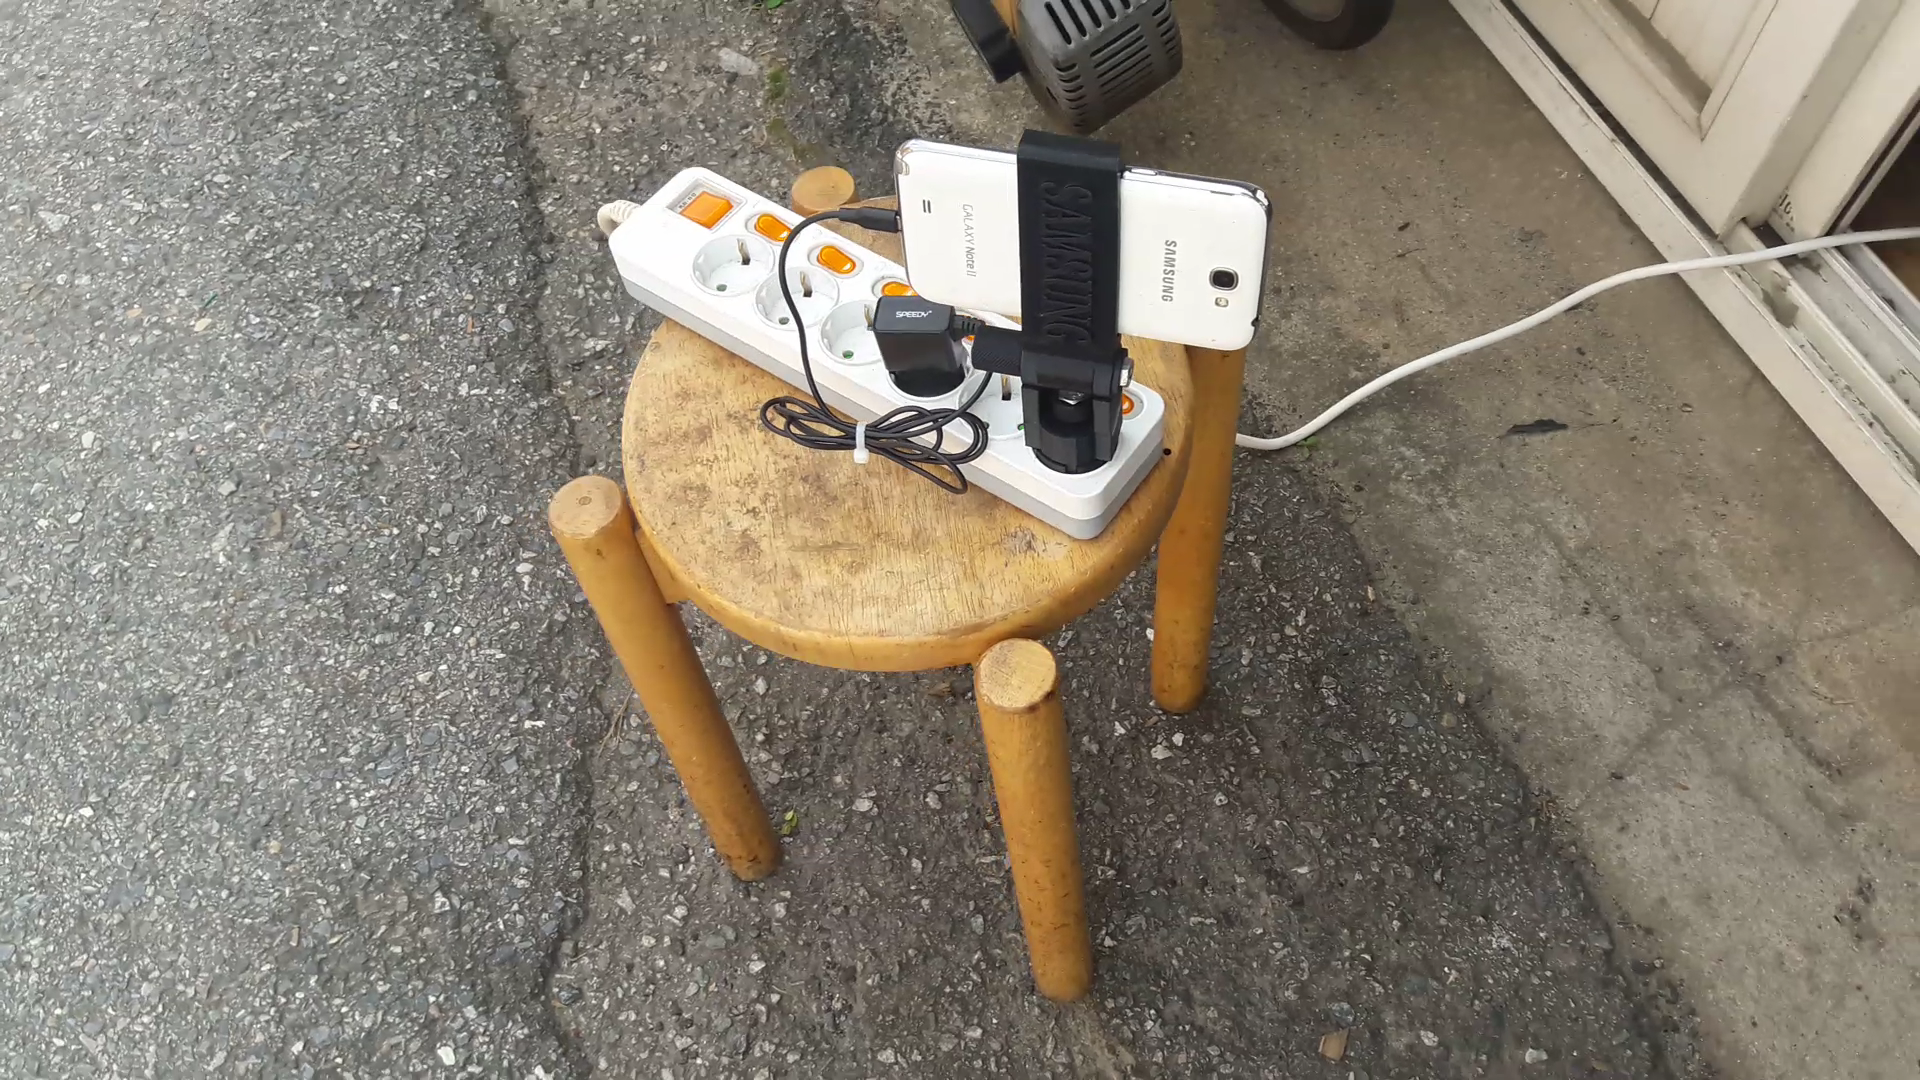  Create a cctv on your smartphone with a 3D printer